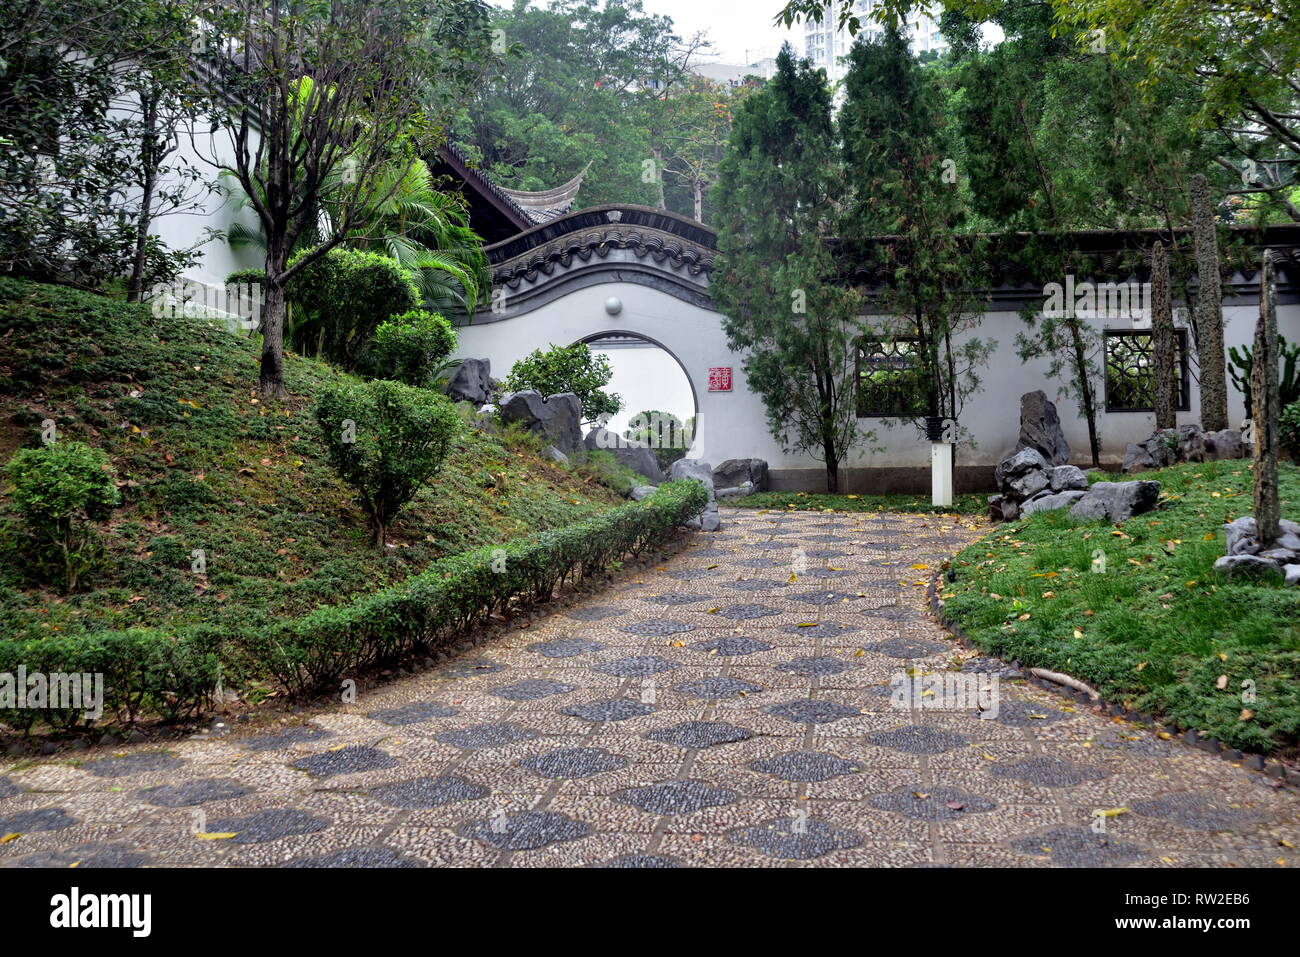 Chinese garden in Kowloon Walled City Park, Hong Kong. Stock Photo